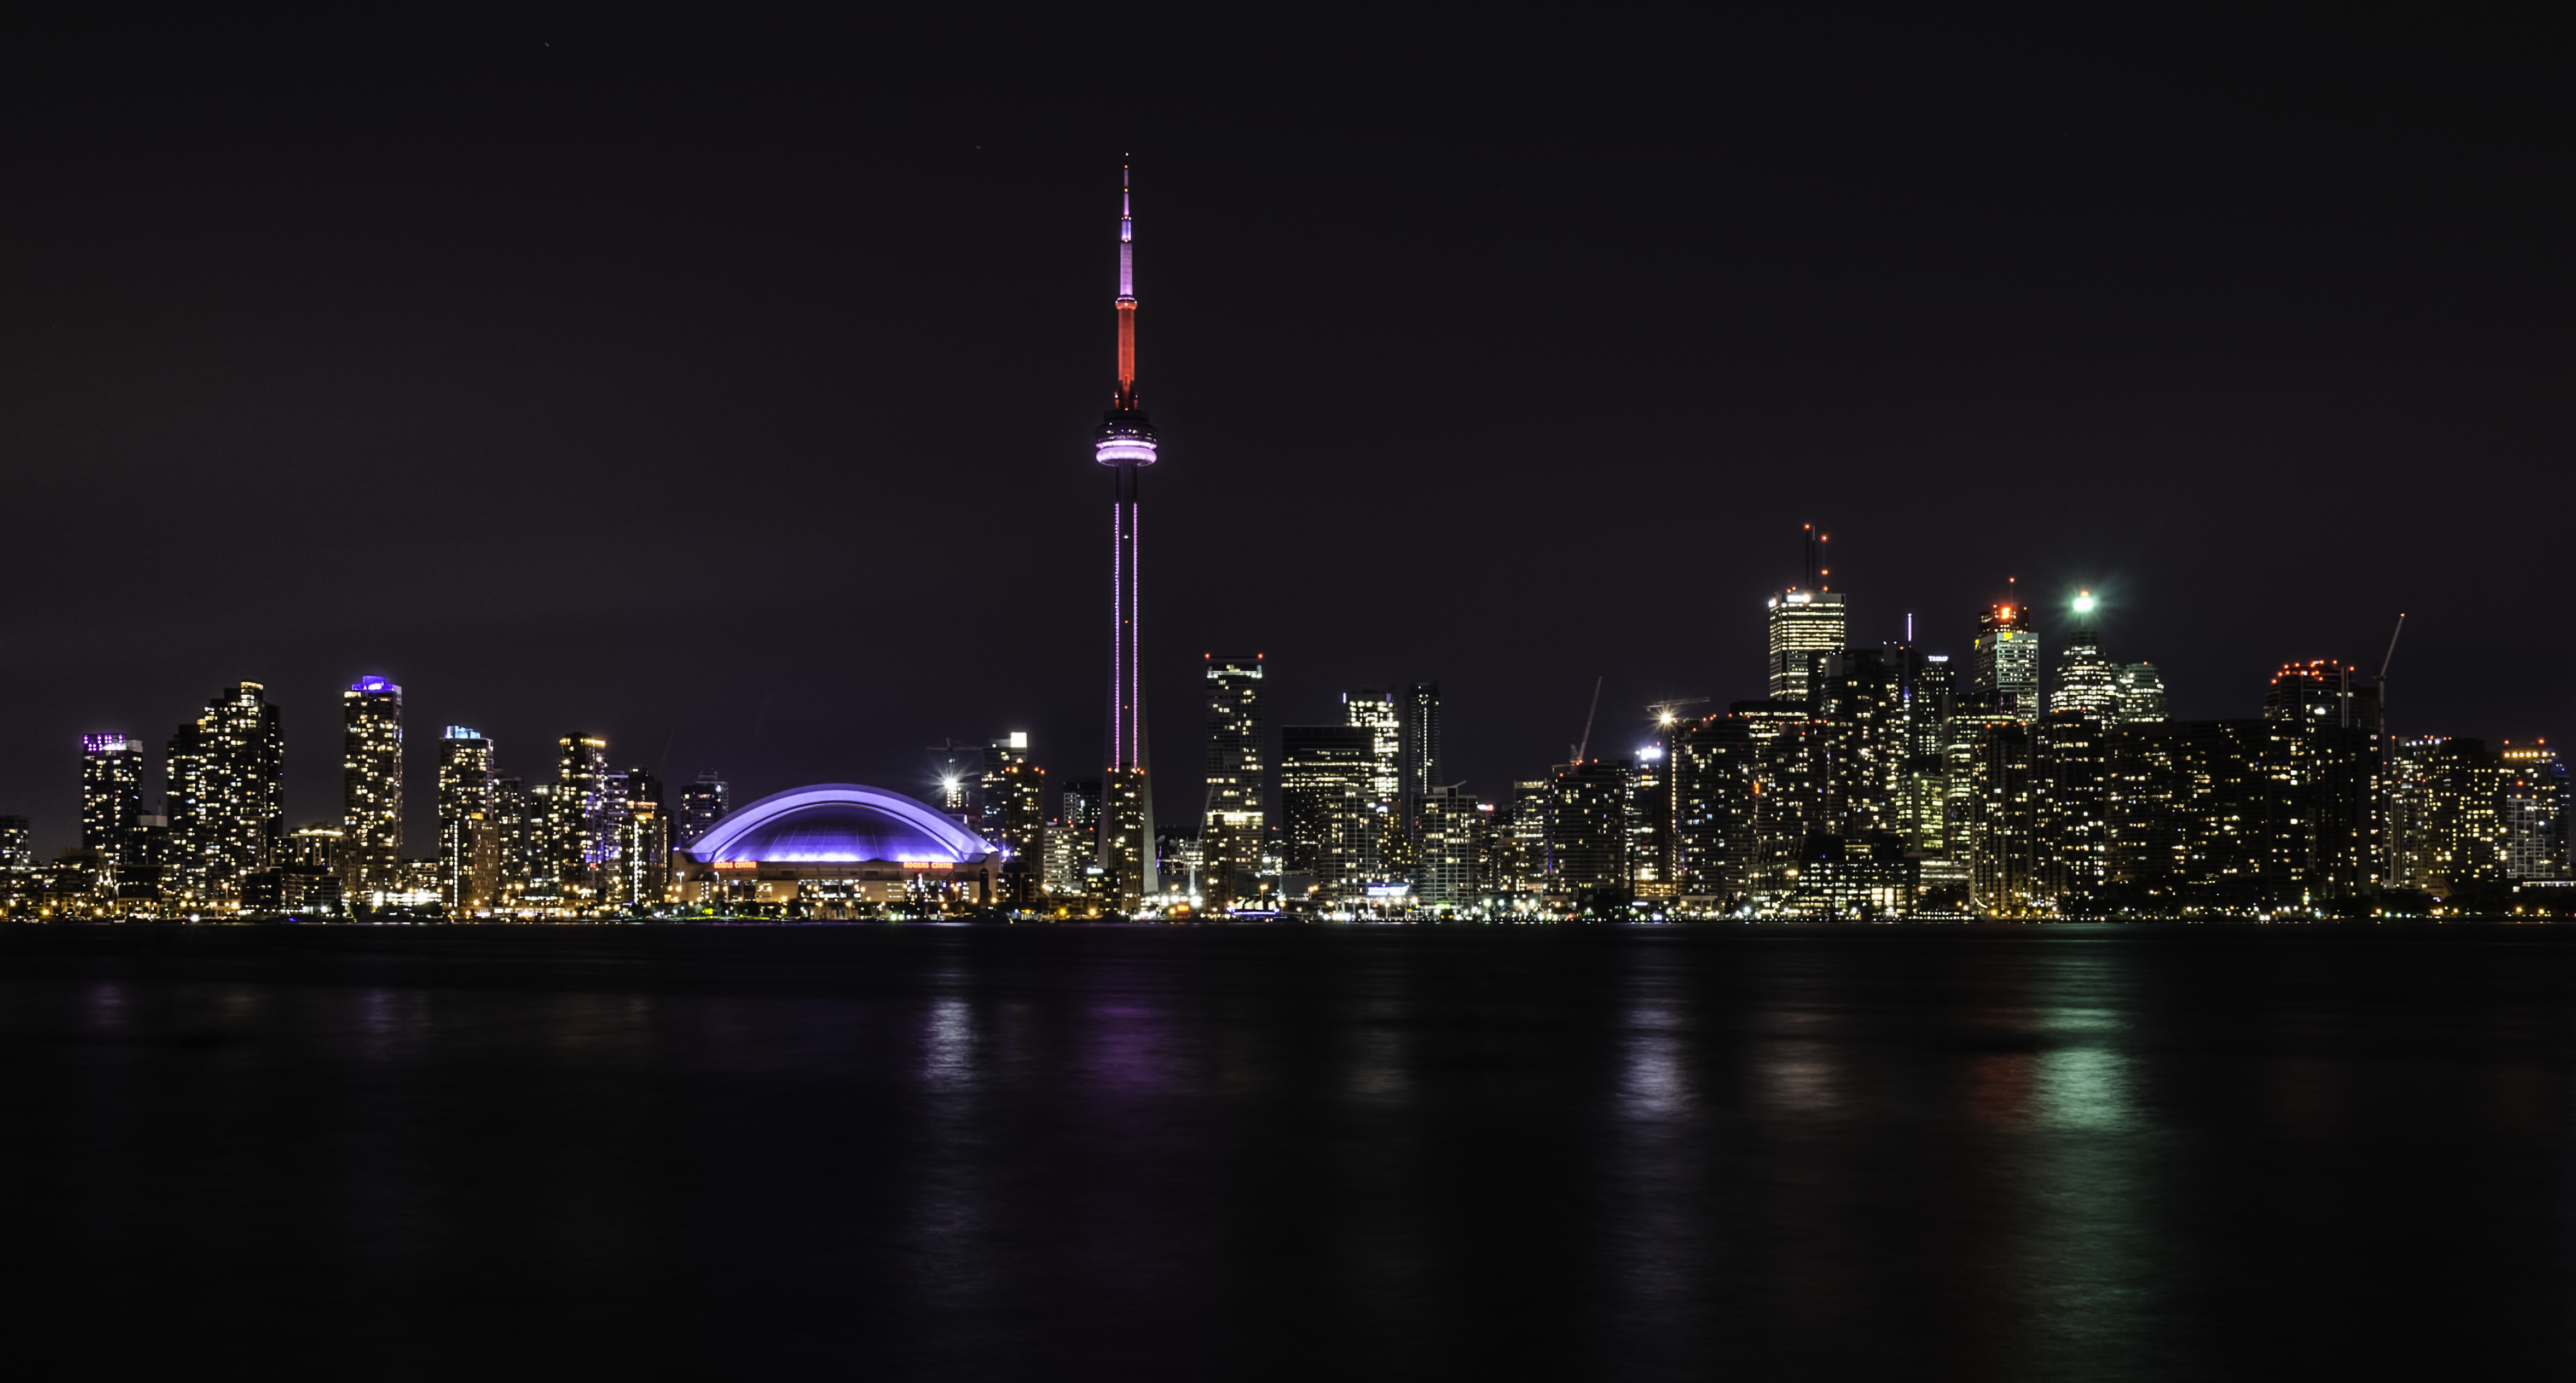 Toronto at night by Falcon912 on